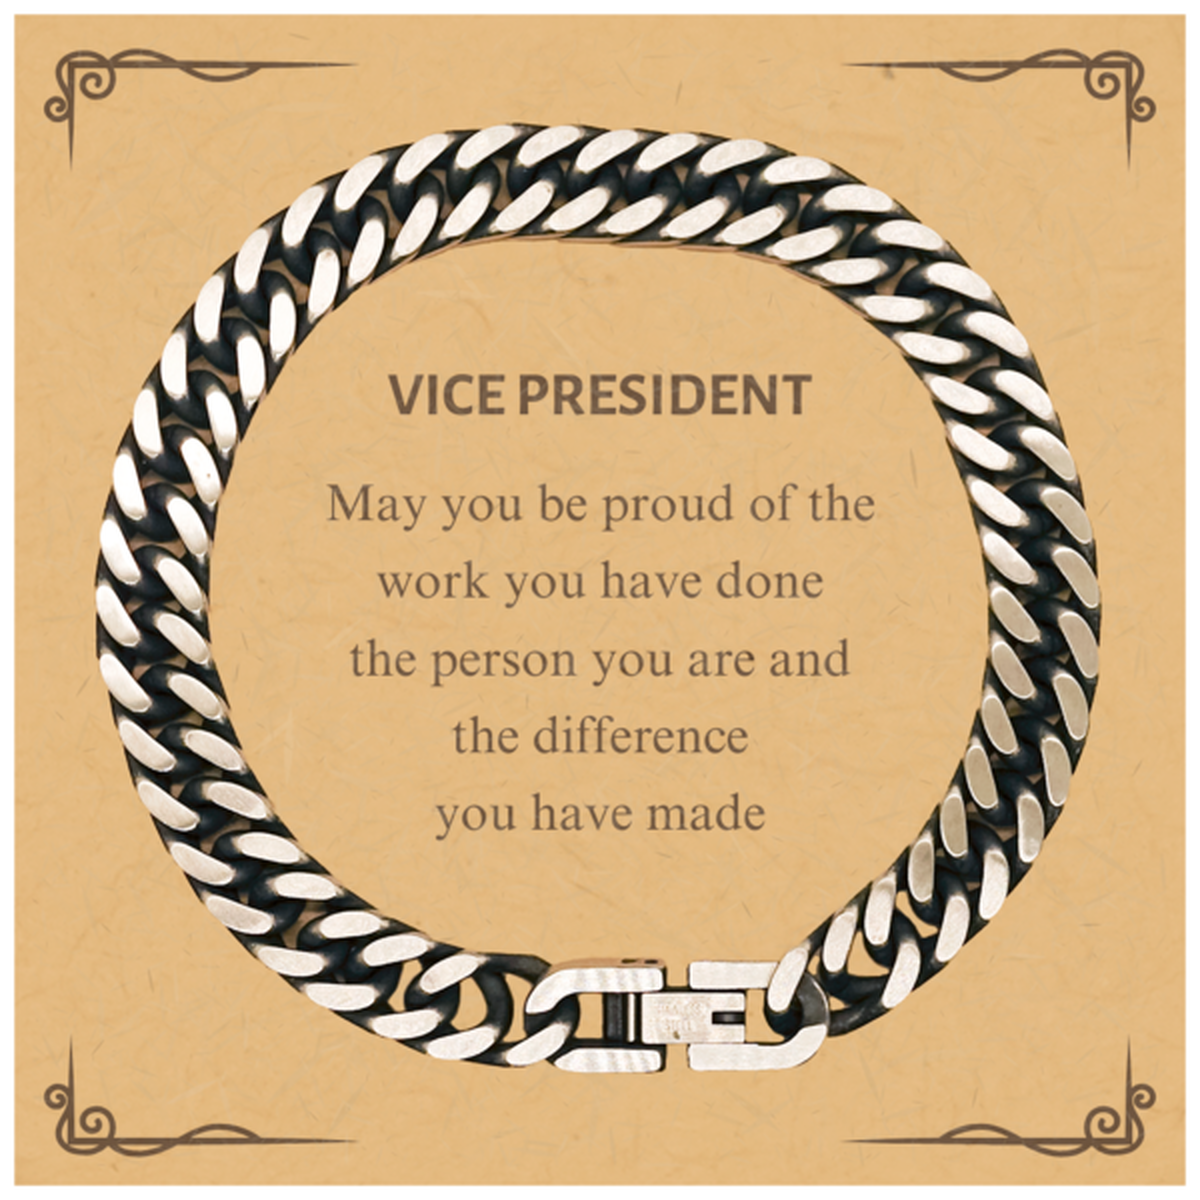 Vice President May you be proud of the work you have done, Retirement Vice President Cuban Link Chain Bracelet for Colleague Appreciation Gifts Amazing for Vice President